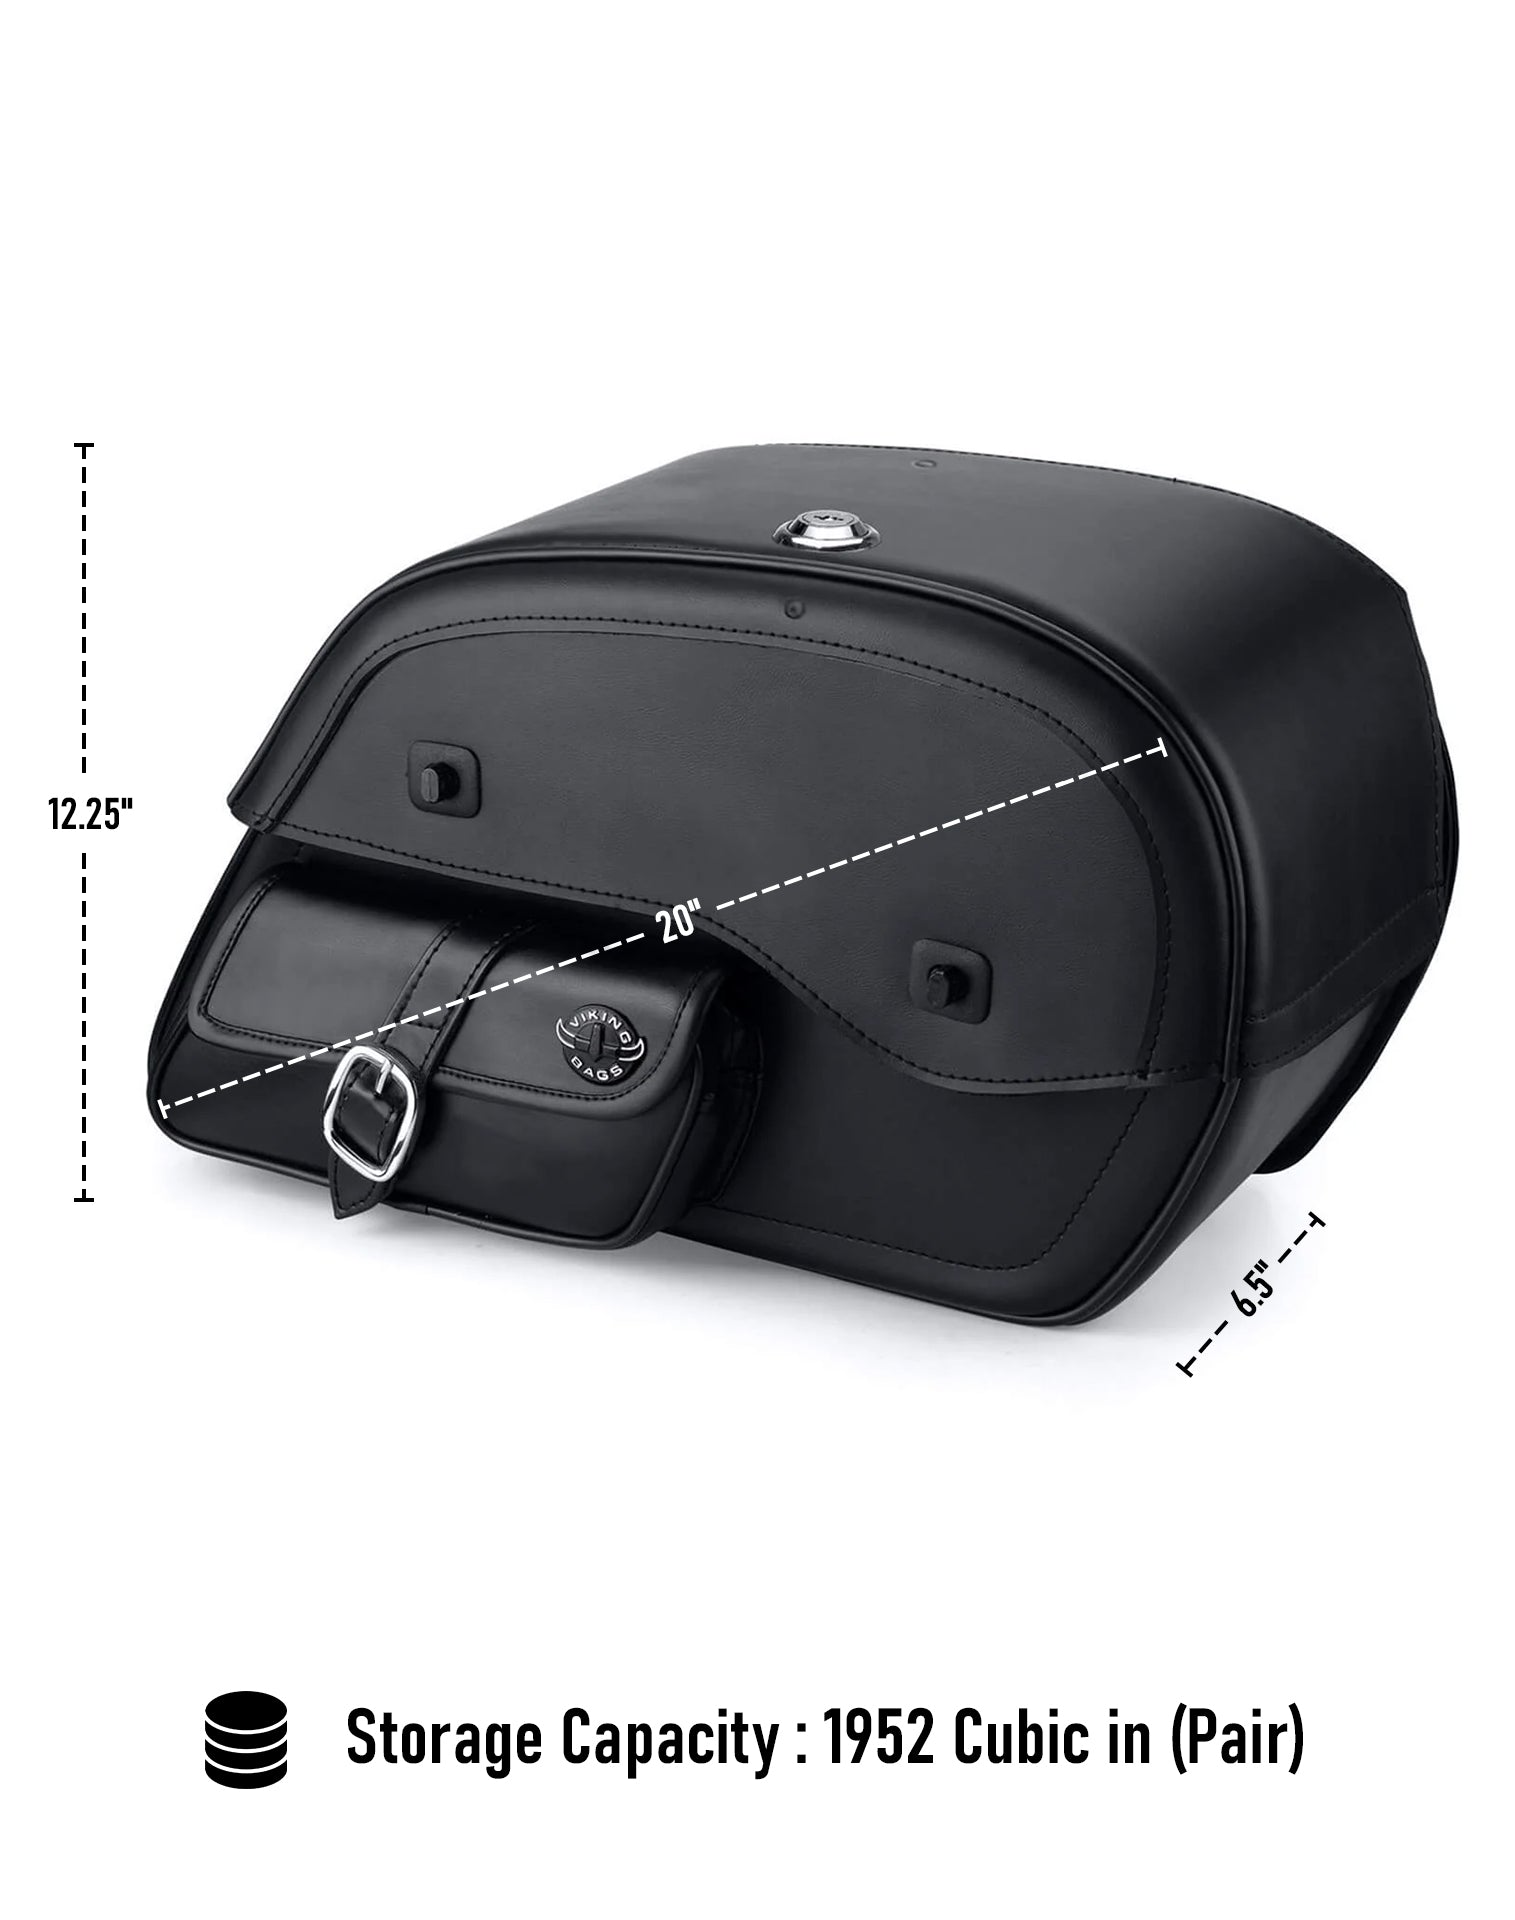 Viking Essential Side Pocket Large Triumph Speedmaster Leather Motorcycle Saddlebags Can Store Your Ridings Gears